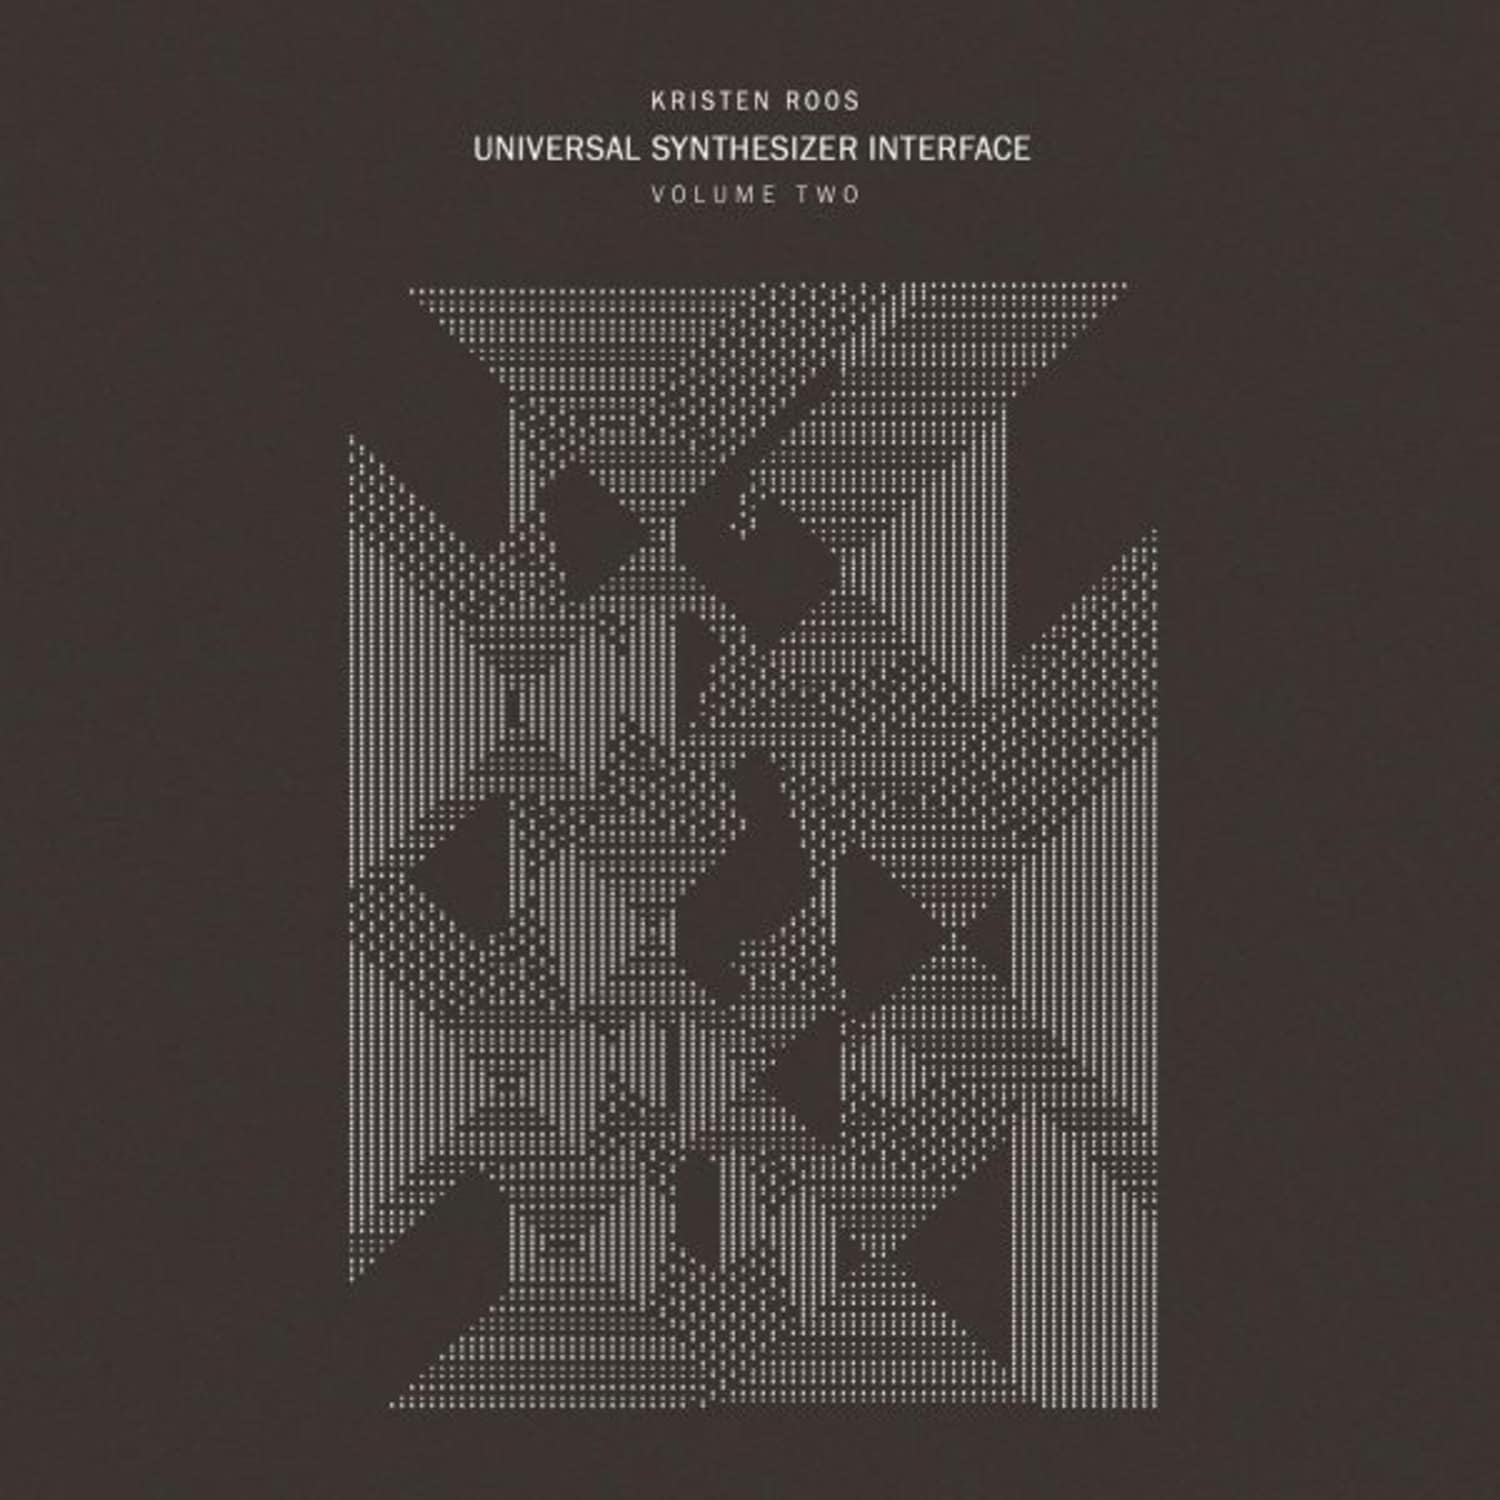  Kristen Roos - UNIVERSAL SYNTHESIZER INTERFACE VOL.2 